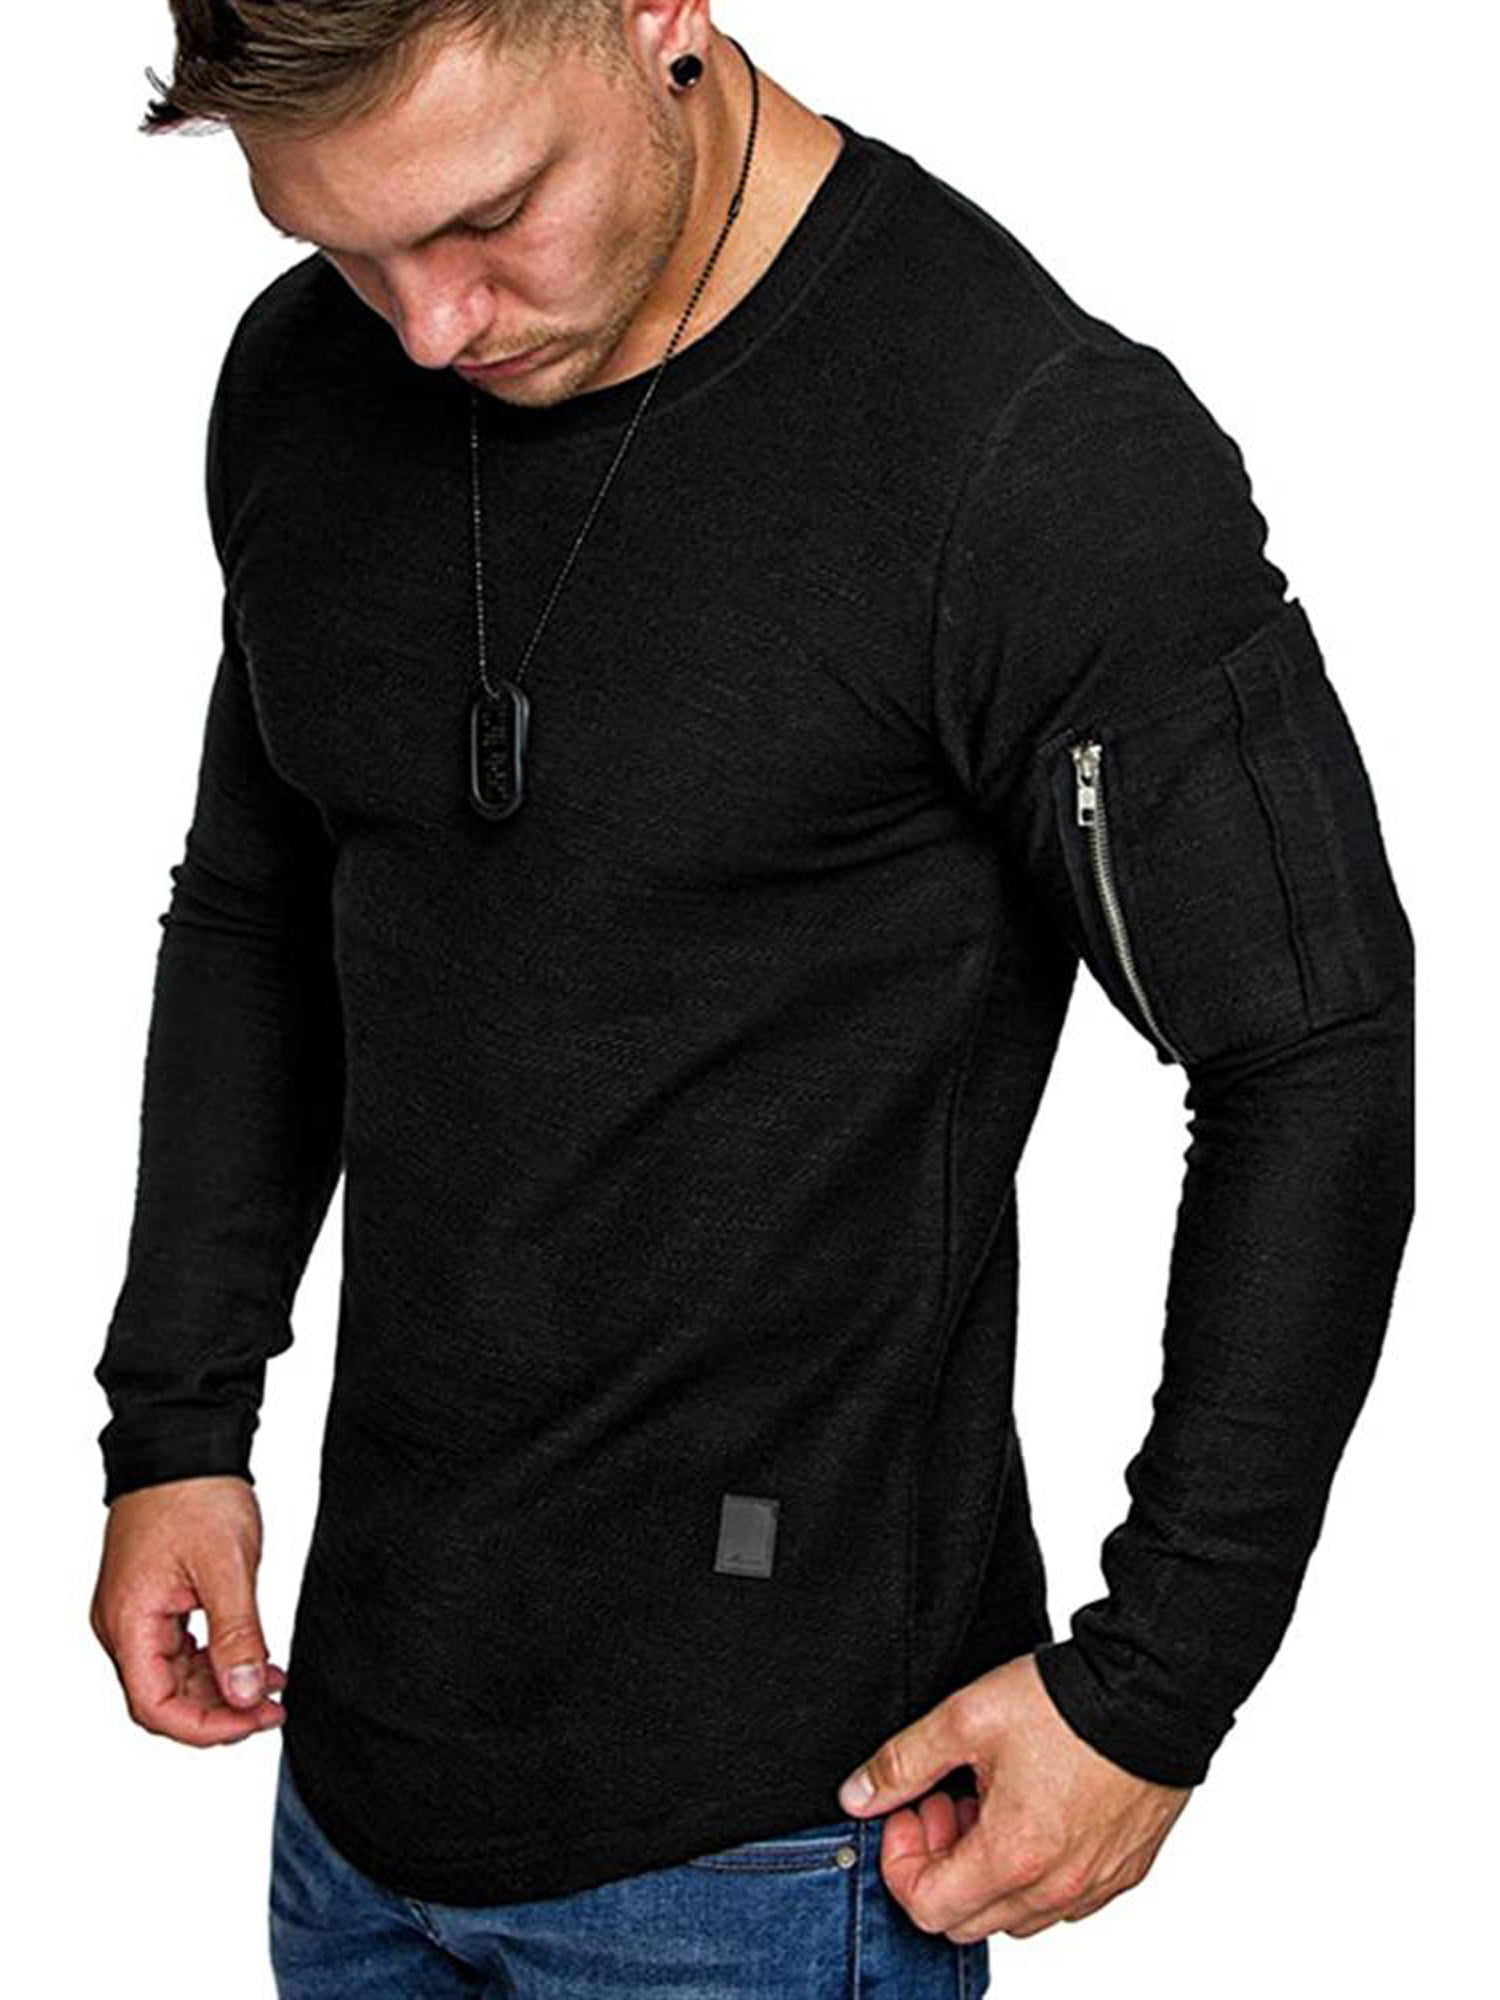 Big and Tall Mens T Shirts Long Sleeve Crew Neck Side Sleeve Pockets Breathable Tops Blouse Pullover Jumper Sweatshirts 